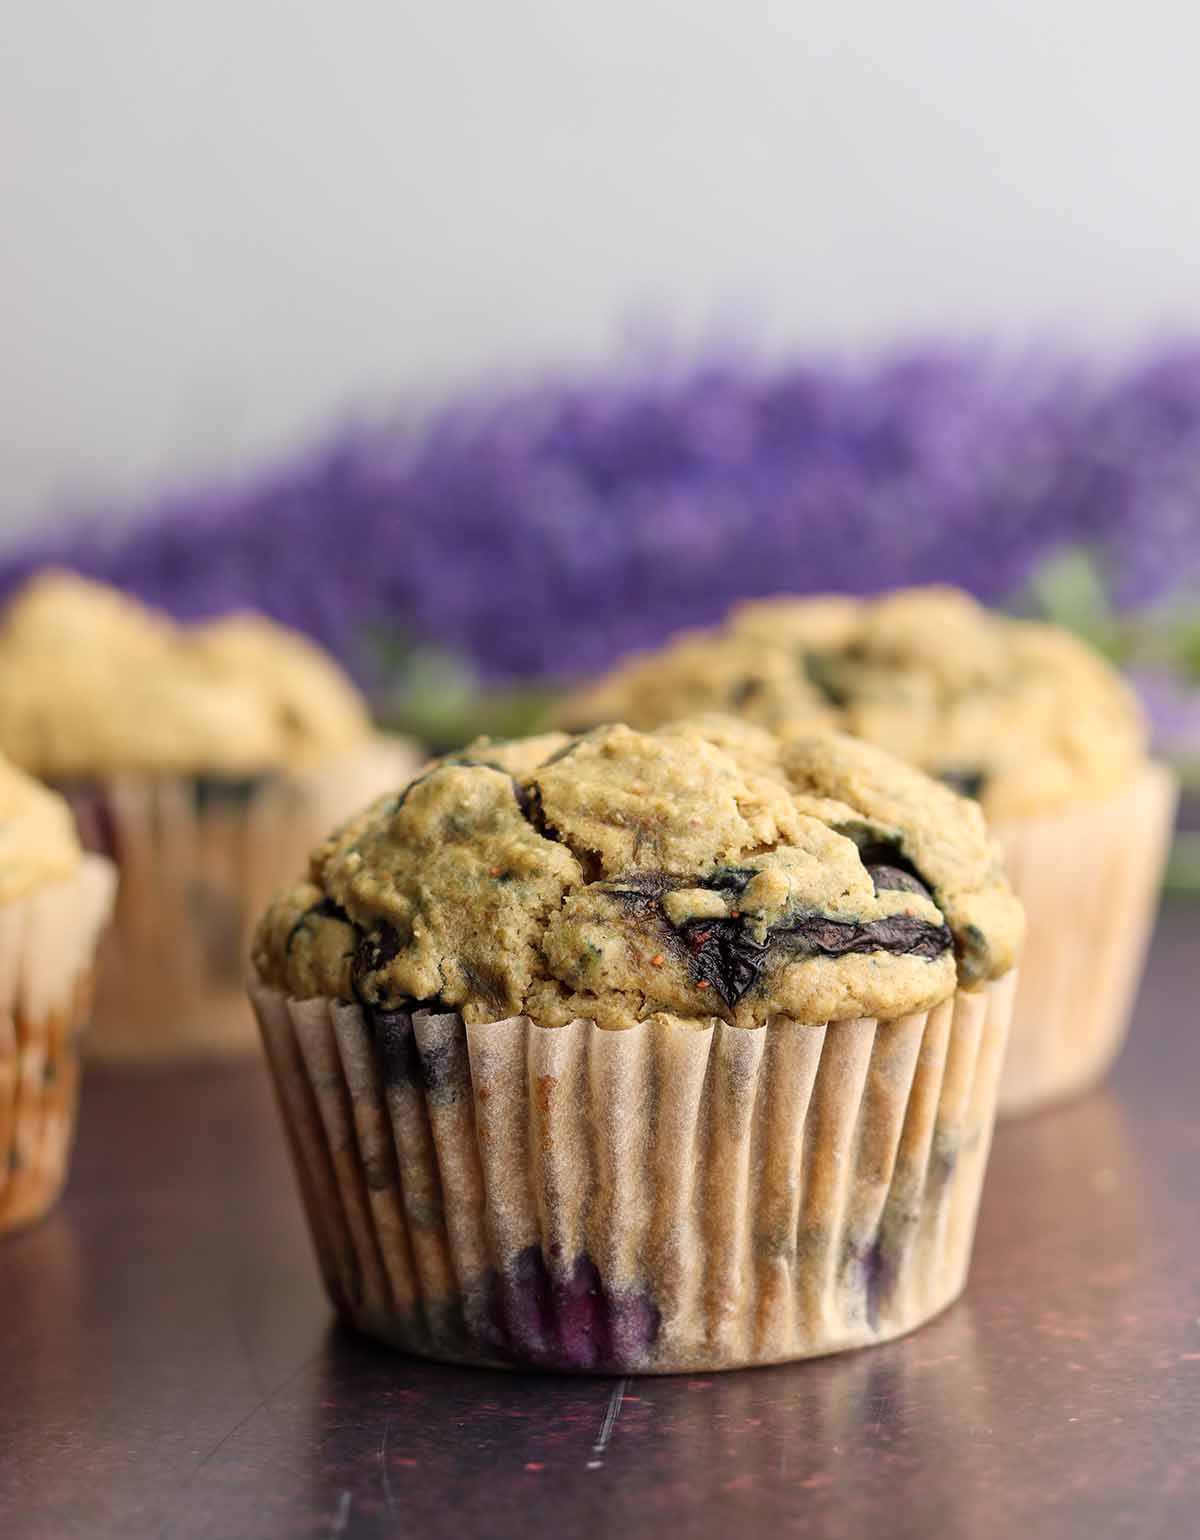 Golden brown blueberry oat muffins in front of a bouquet of lavender